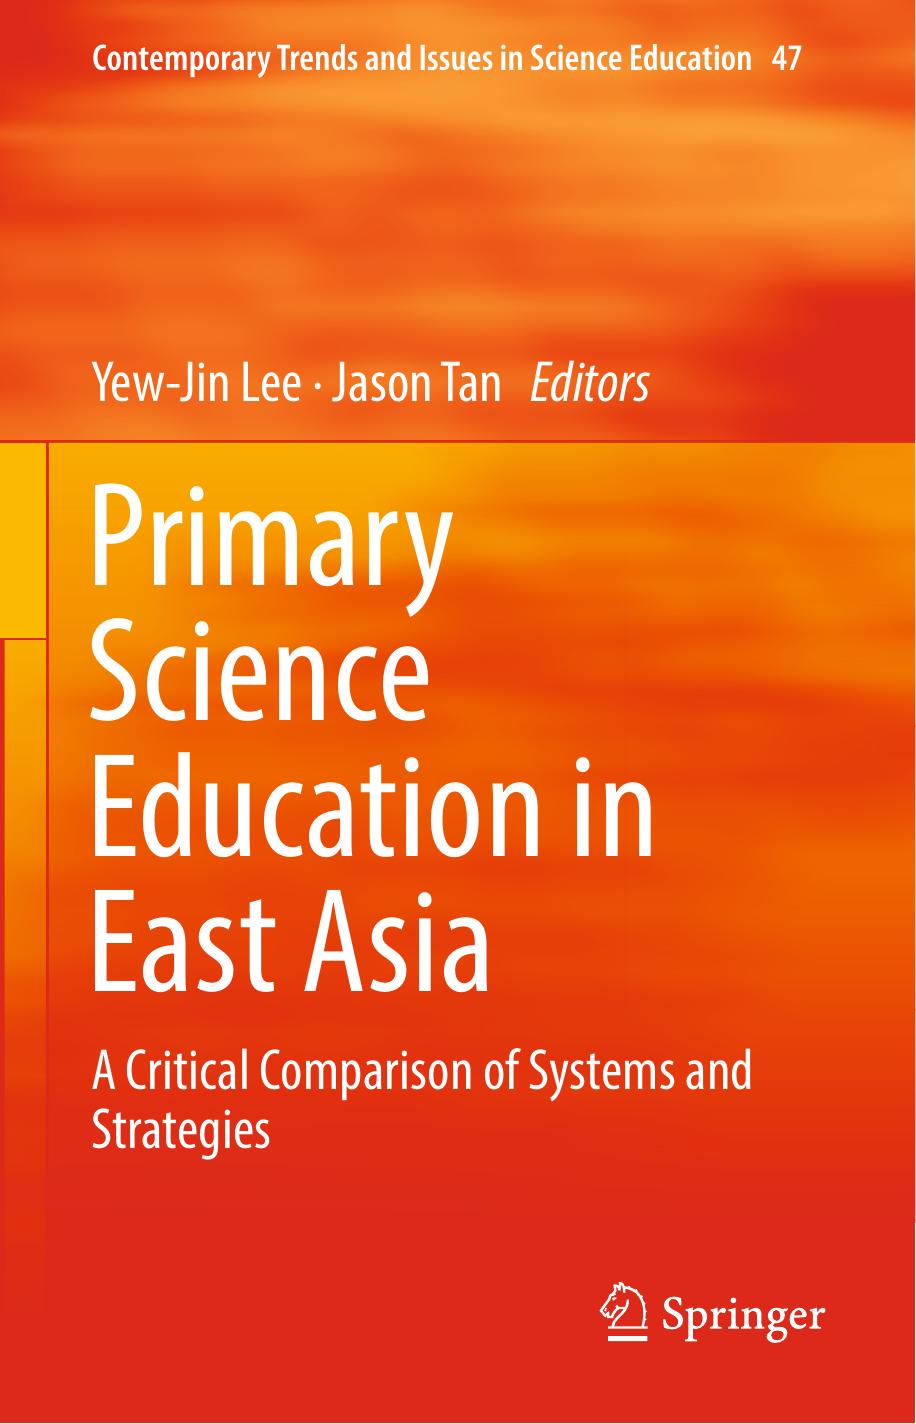 Primary Science Education in East Asia  A Critical Comparison of Systems and Strategies 2018.pdf